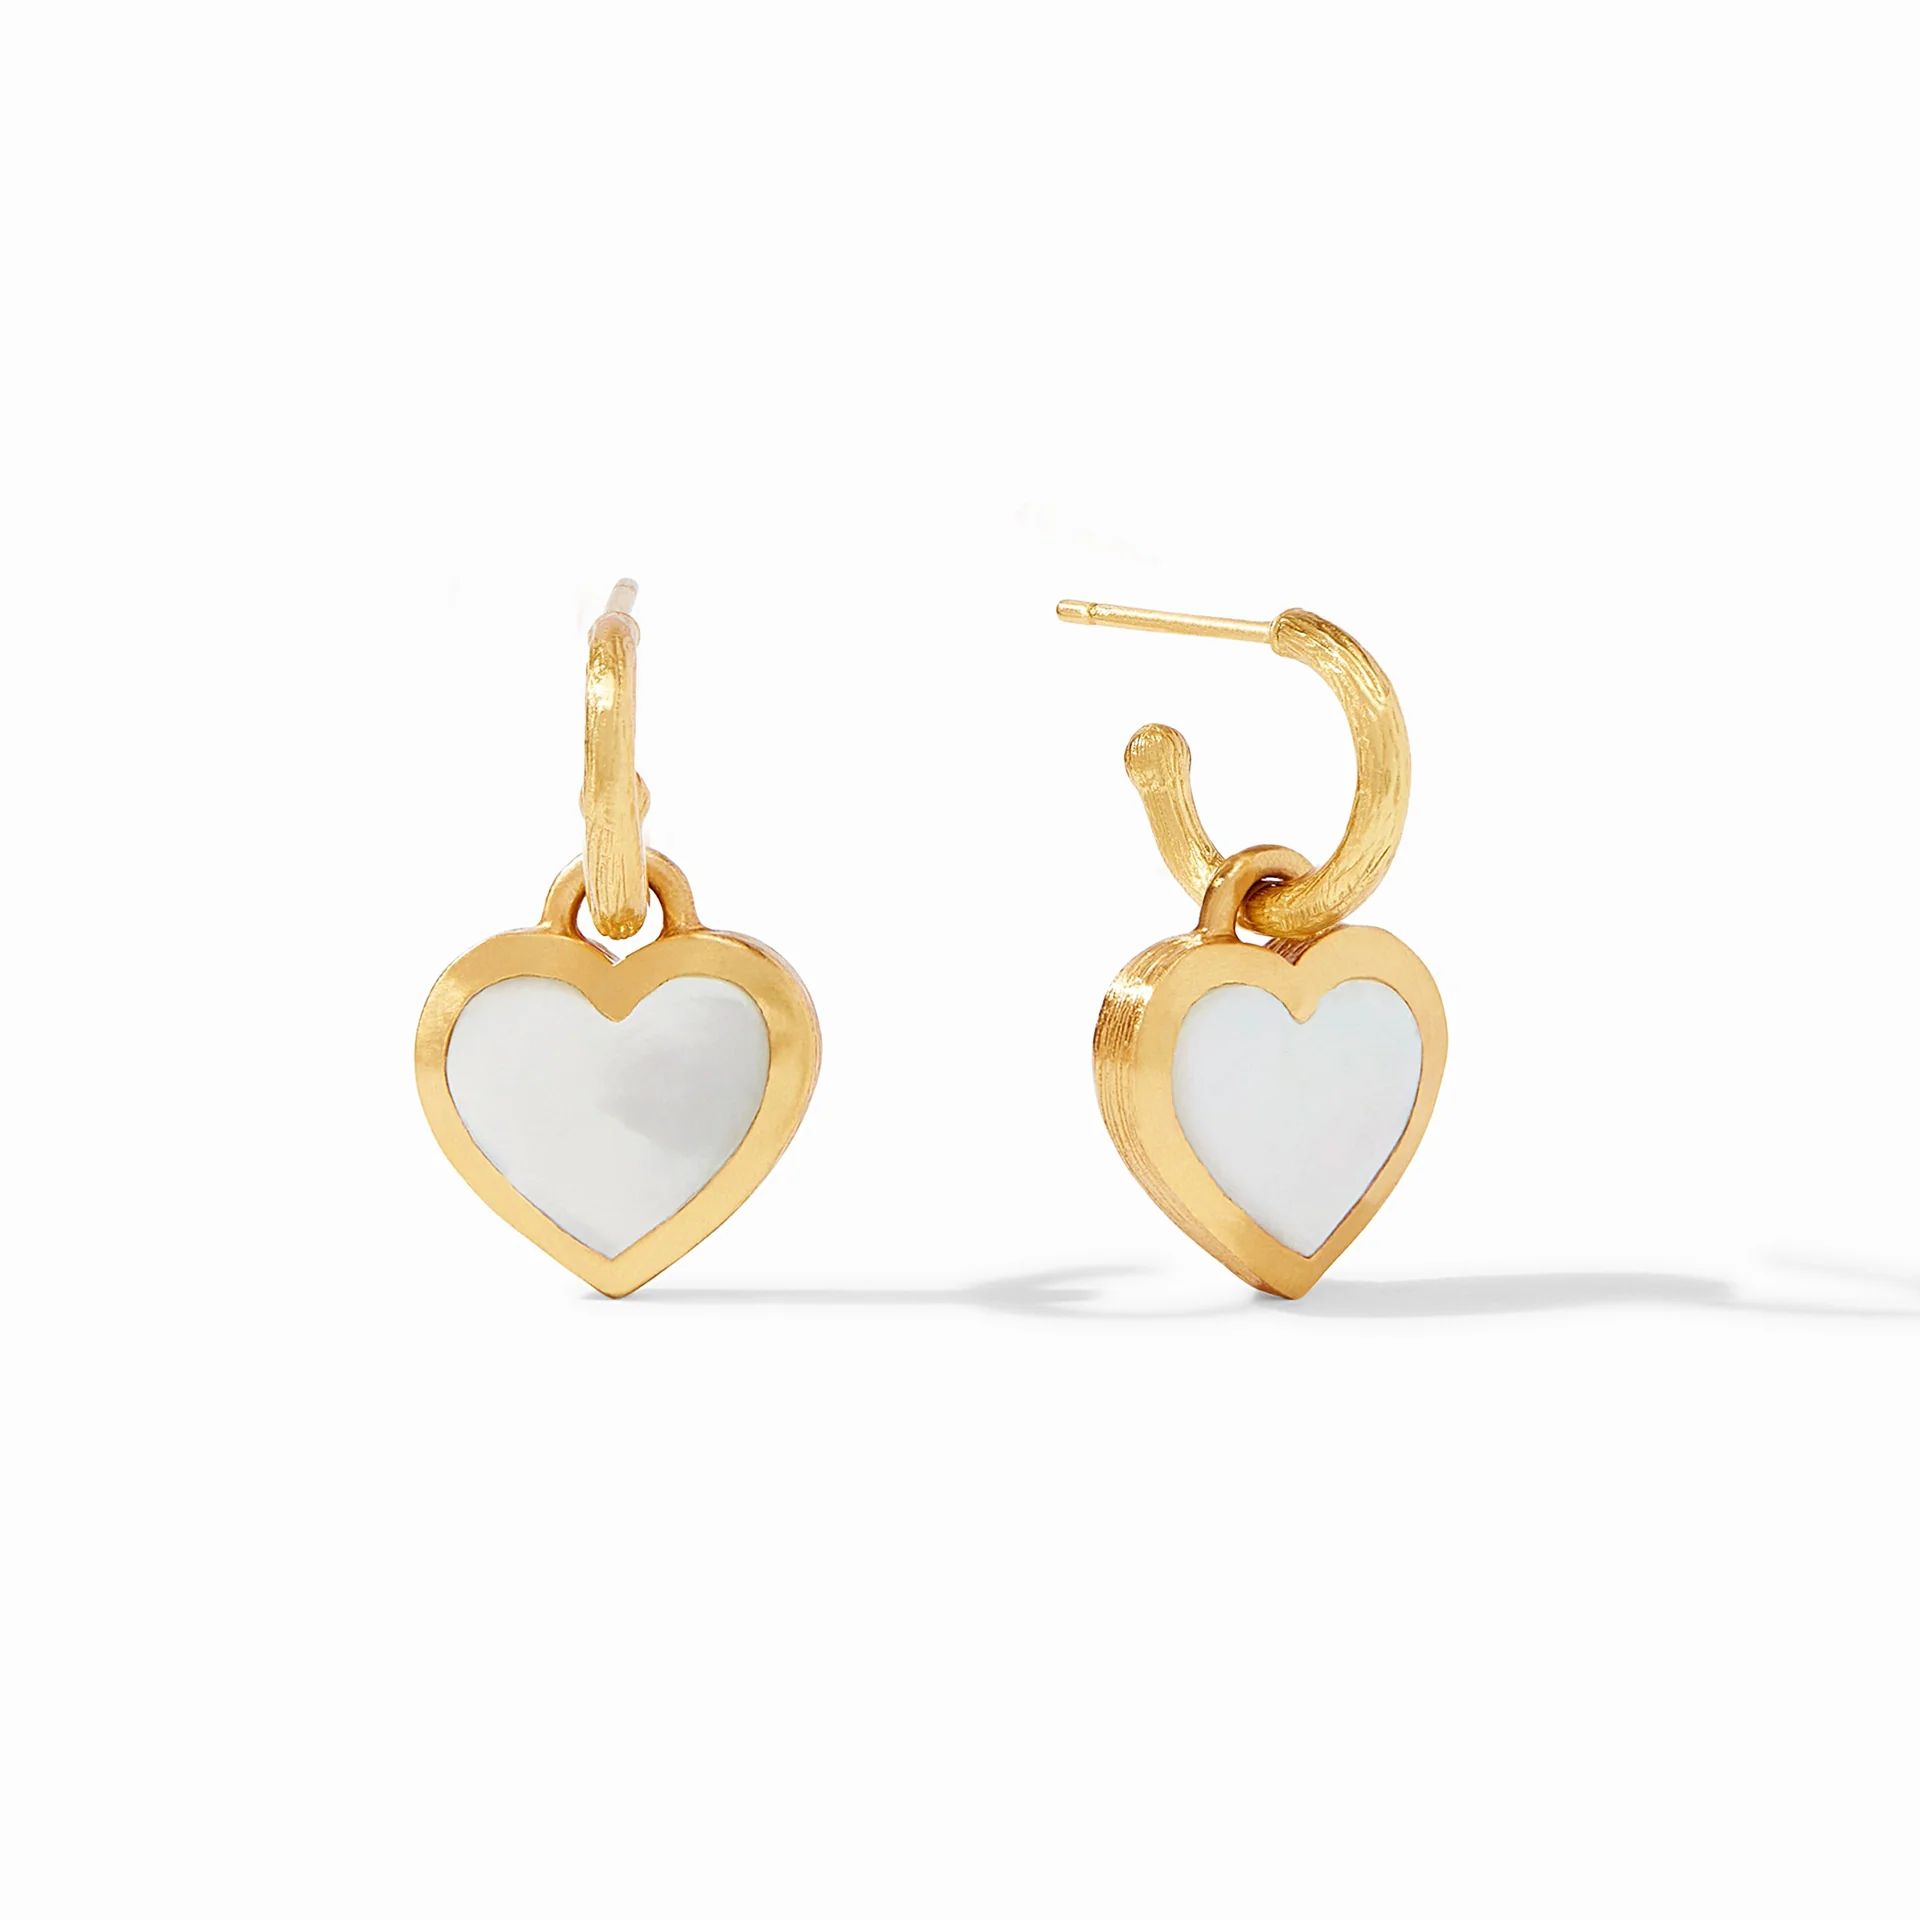 Gold Hoop Earring with Heart Charm | Julie Vos | Julie Vos